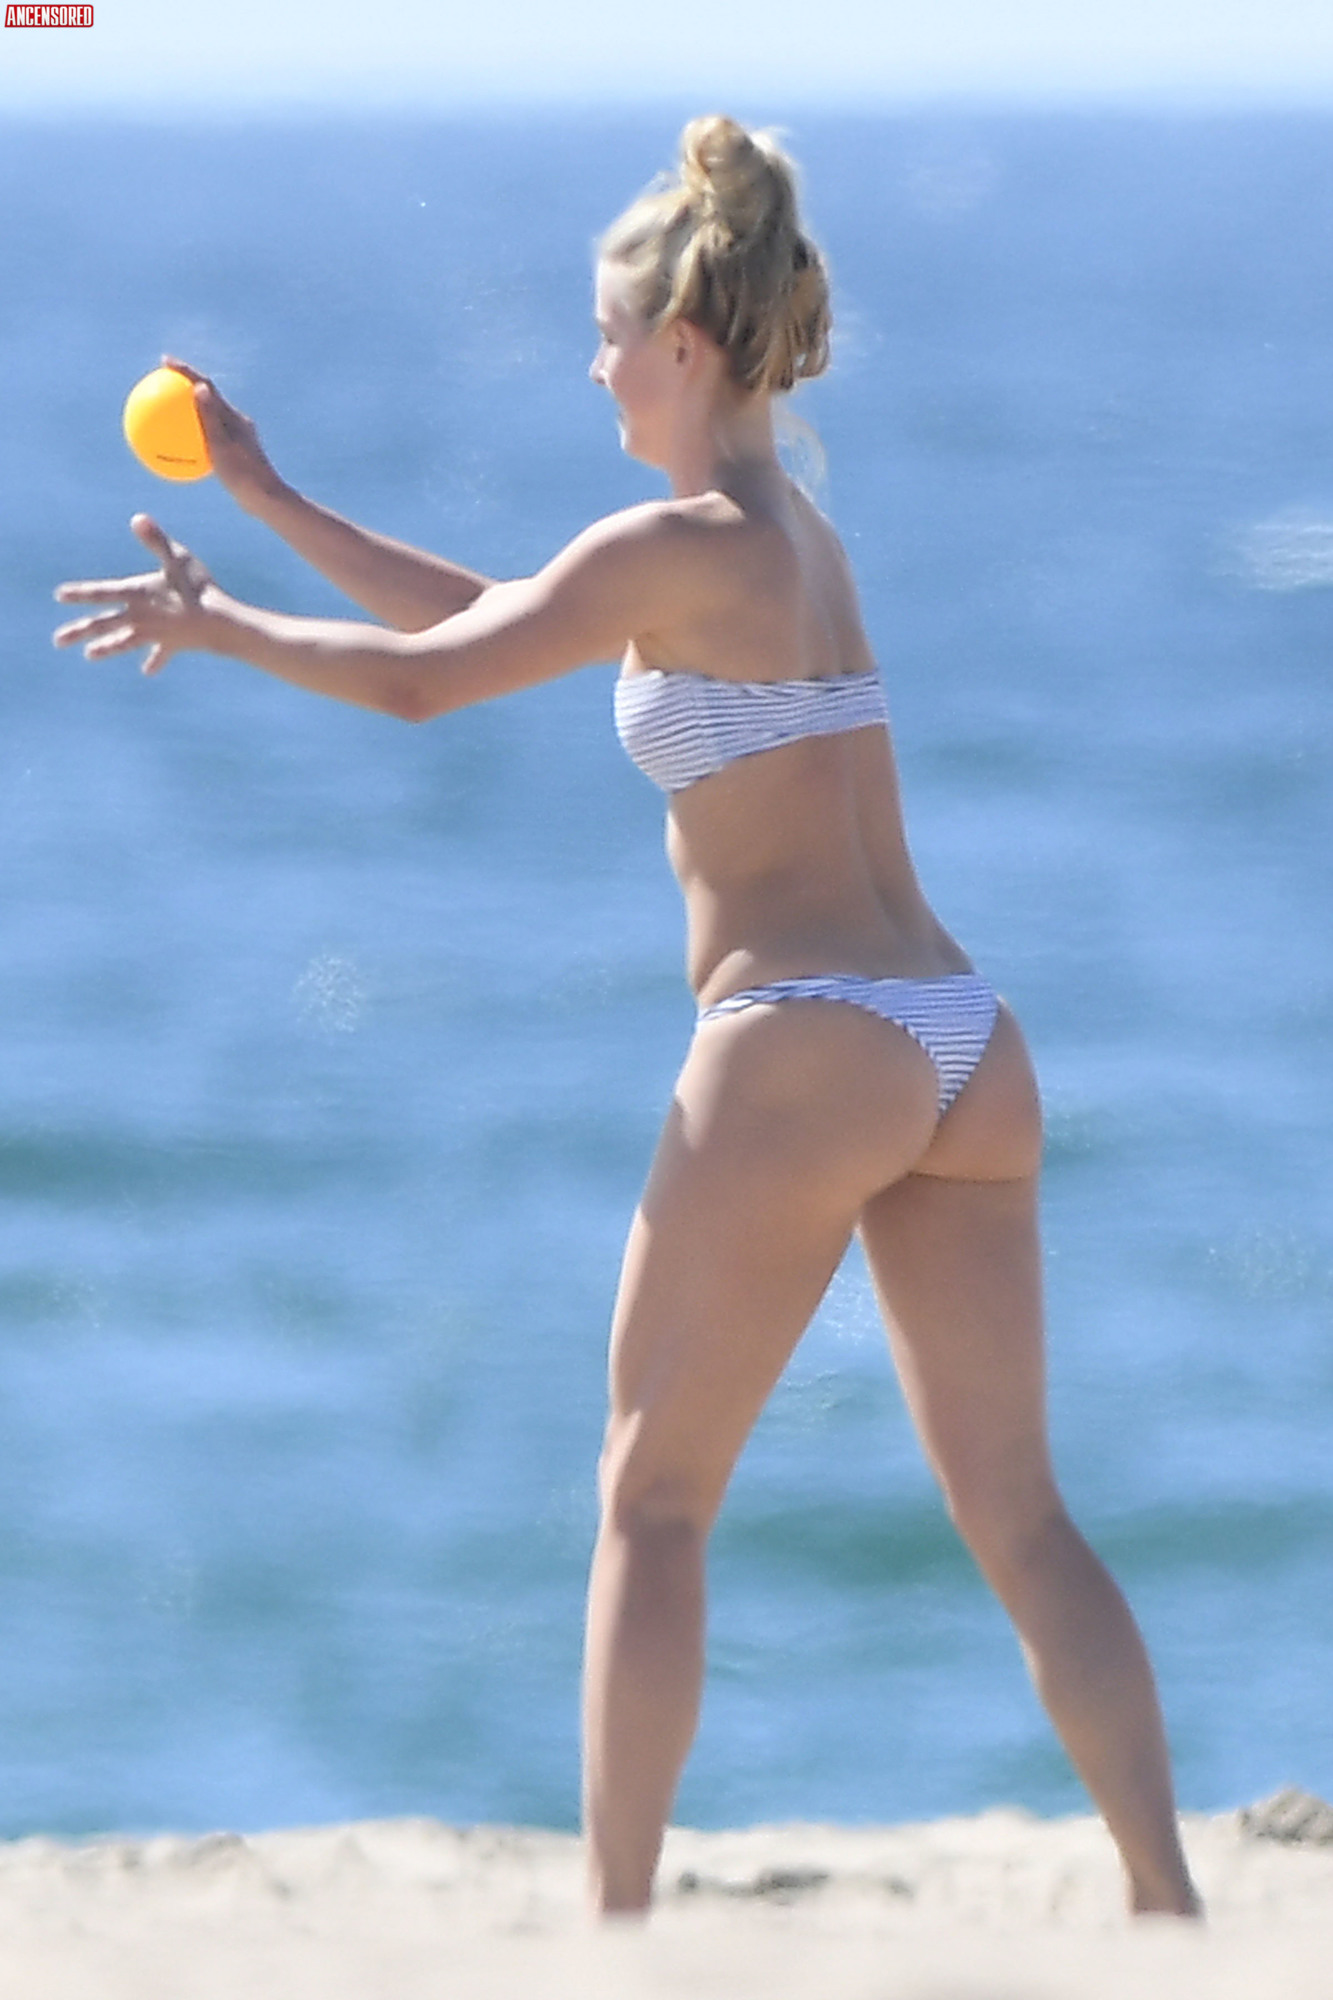 Naked Julianne Hough Added 01282020 By Csyn 